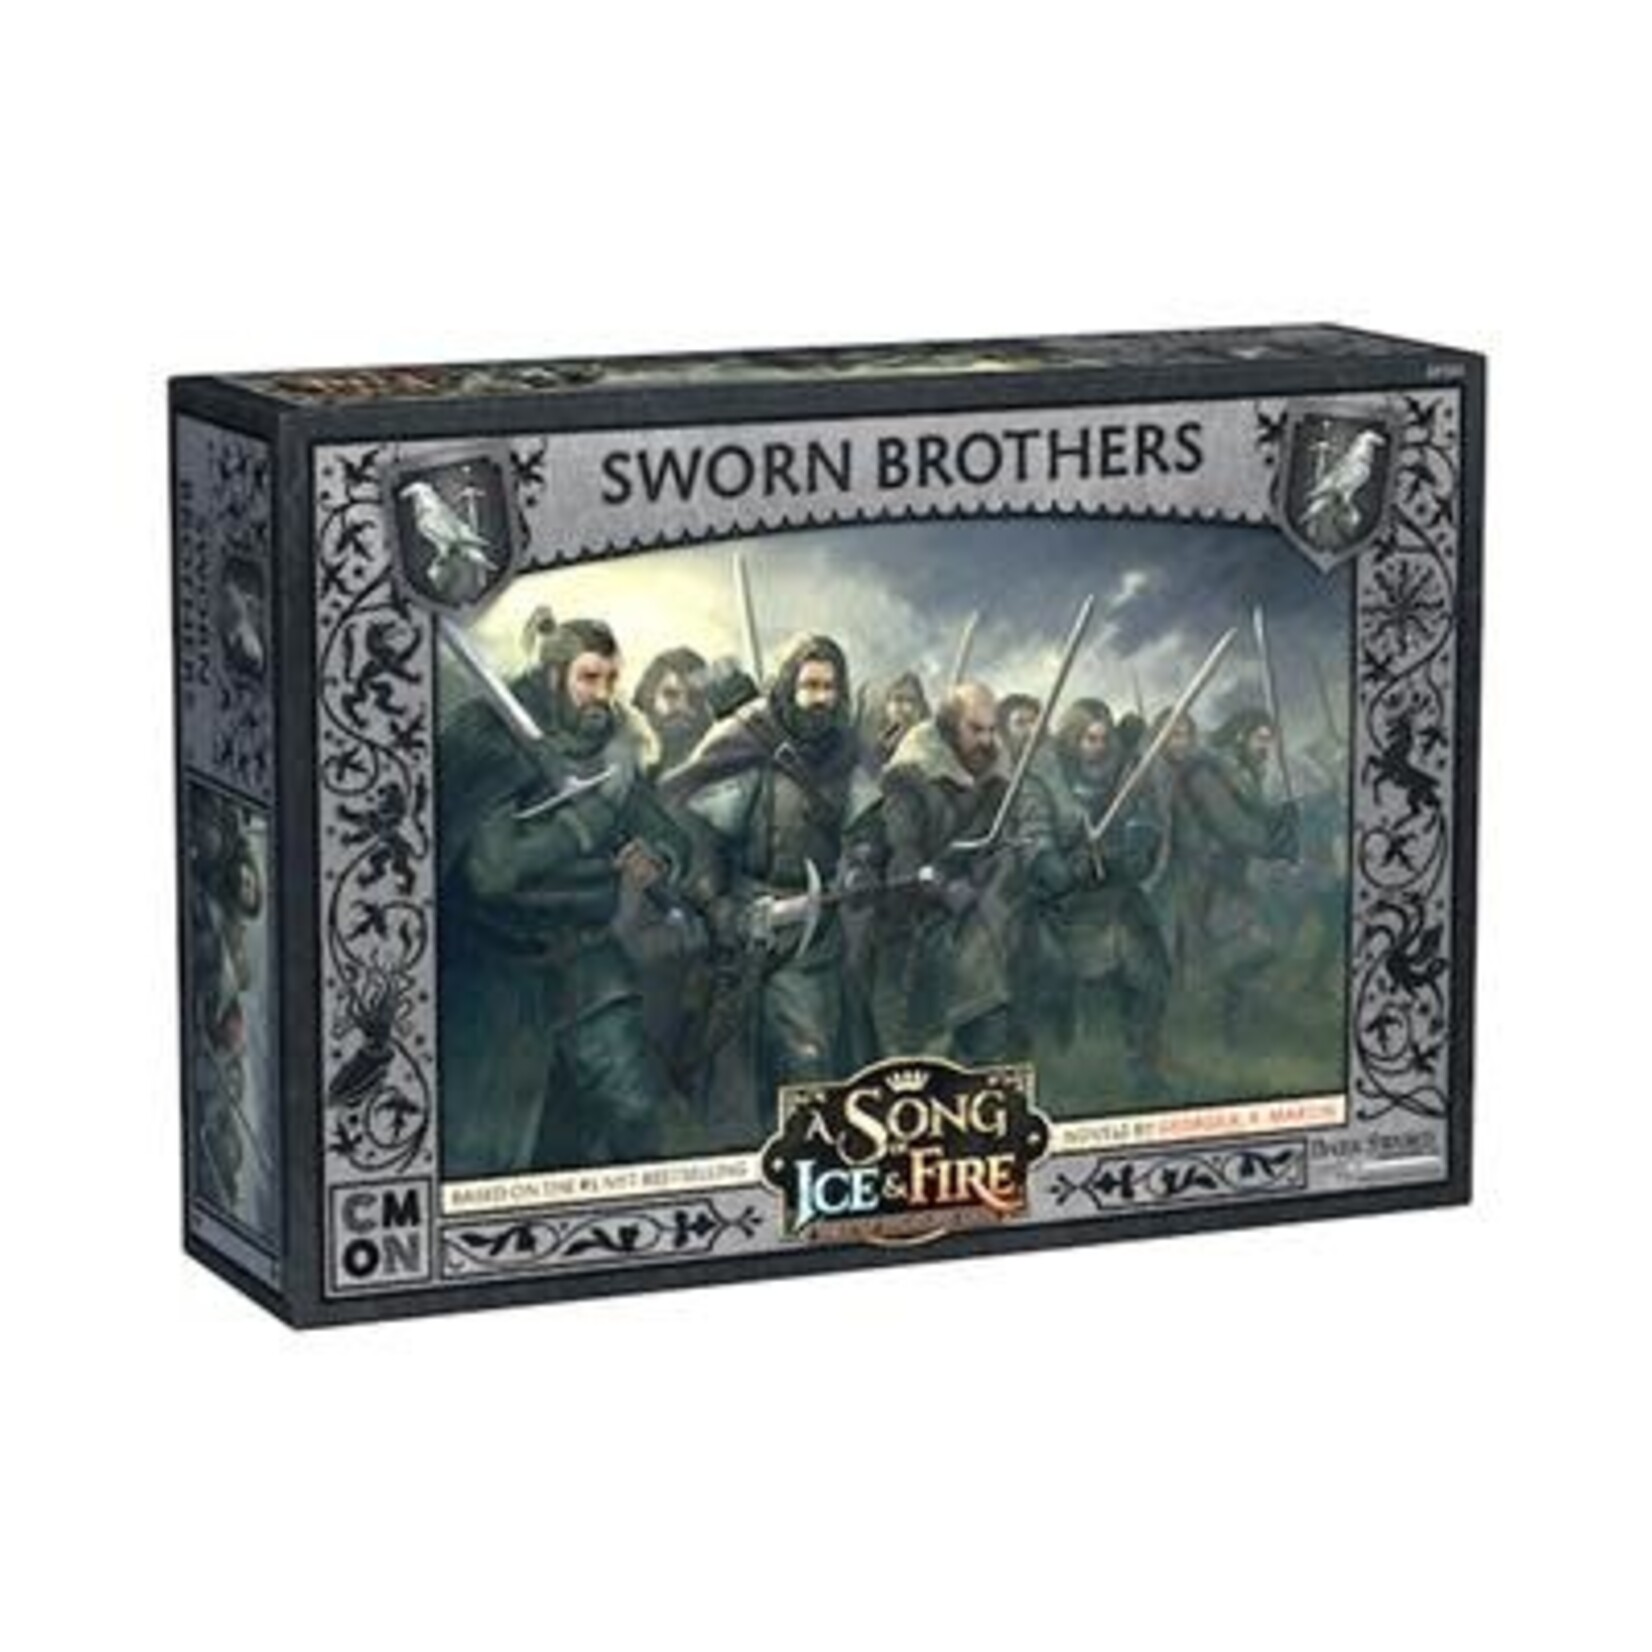 A Song of Ice and Fire: Sworn Brothers Unit Box